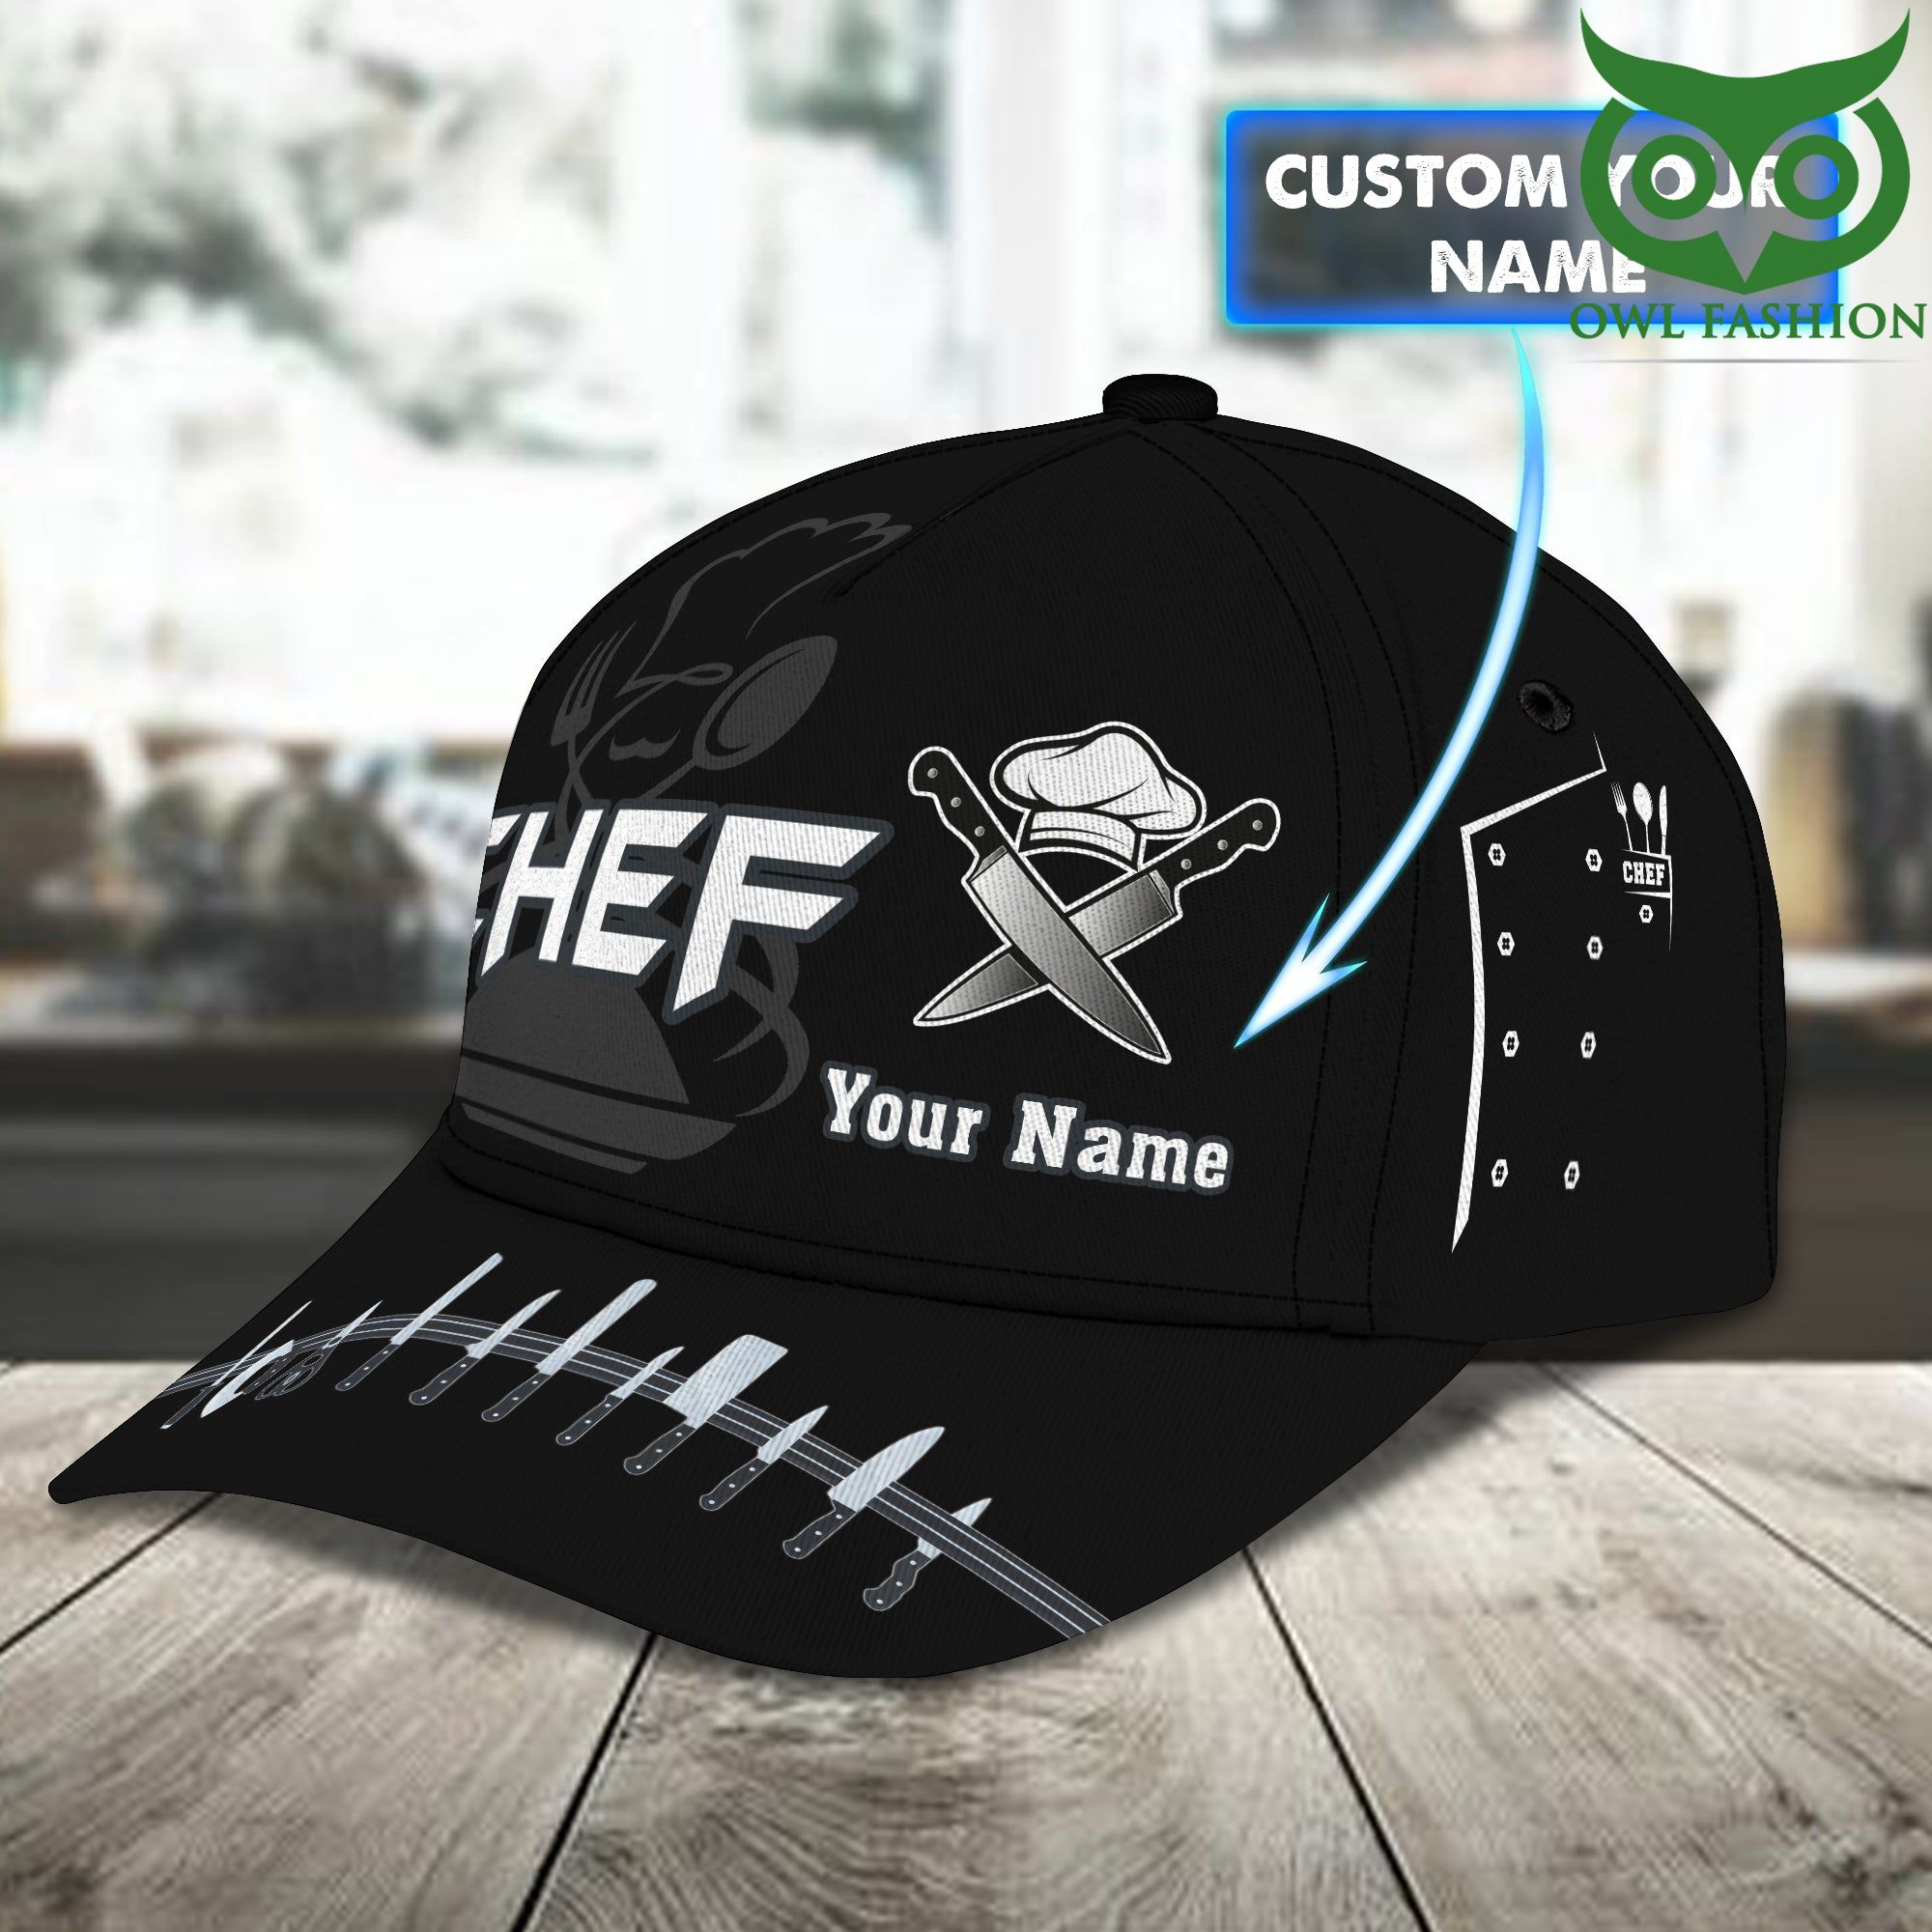 Personalized CHEF Knives black 3D Classic cap